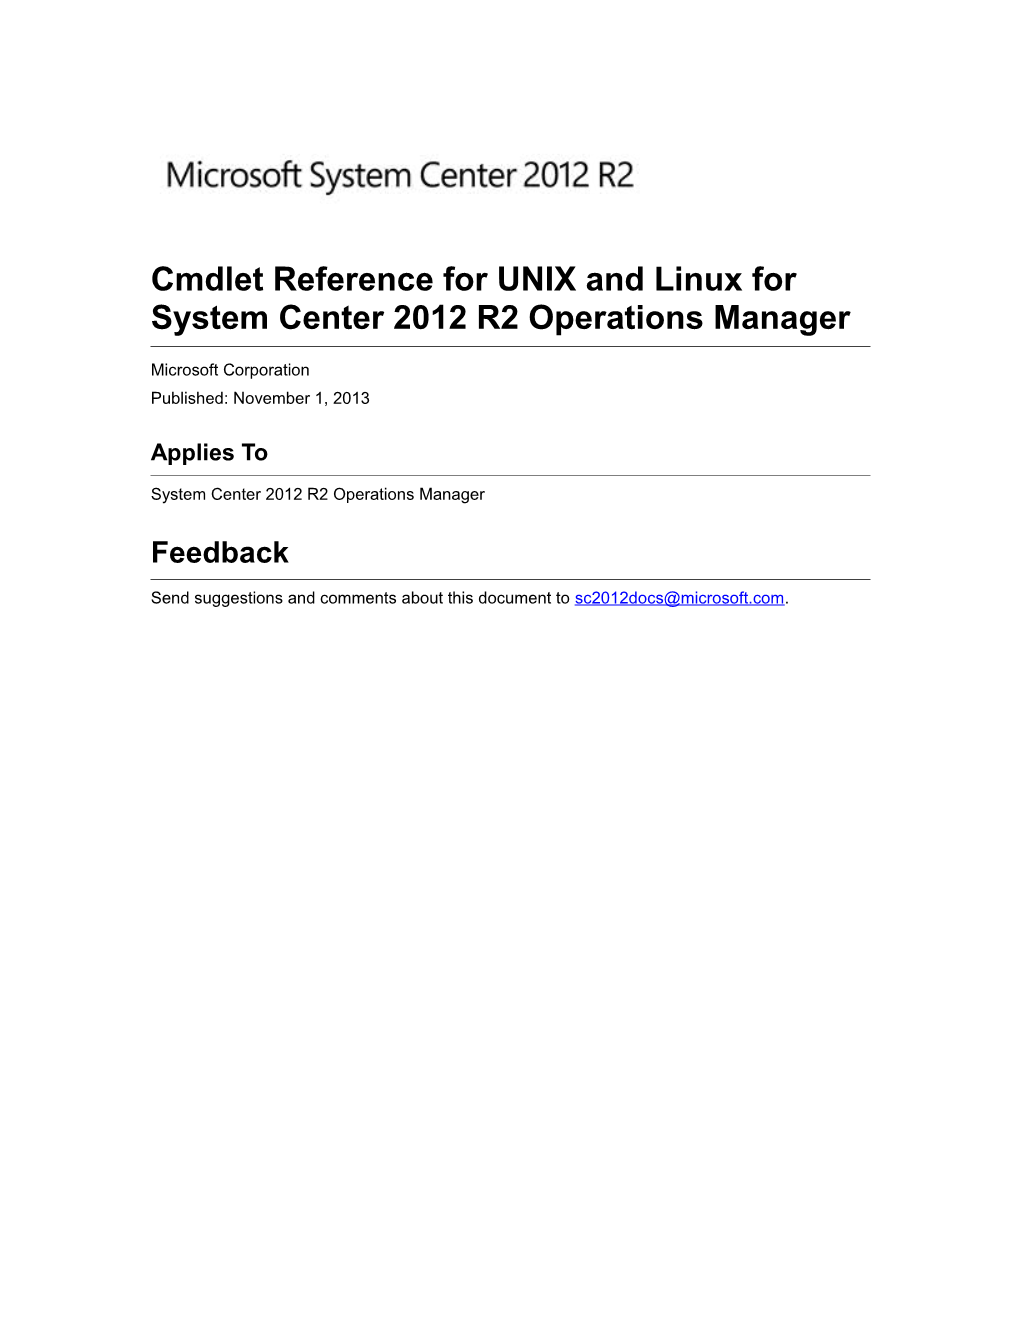 Cmdlet Reference for UNIX and Linux for System Center 2012 R2 Operations Manager